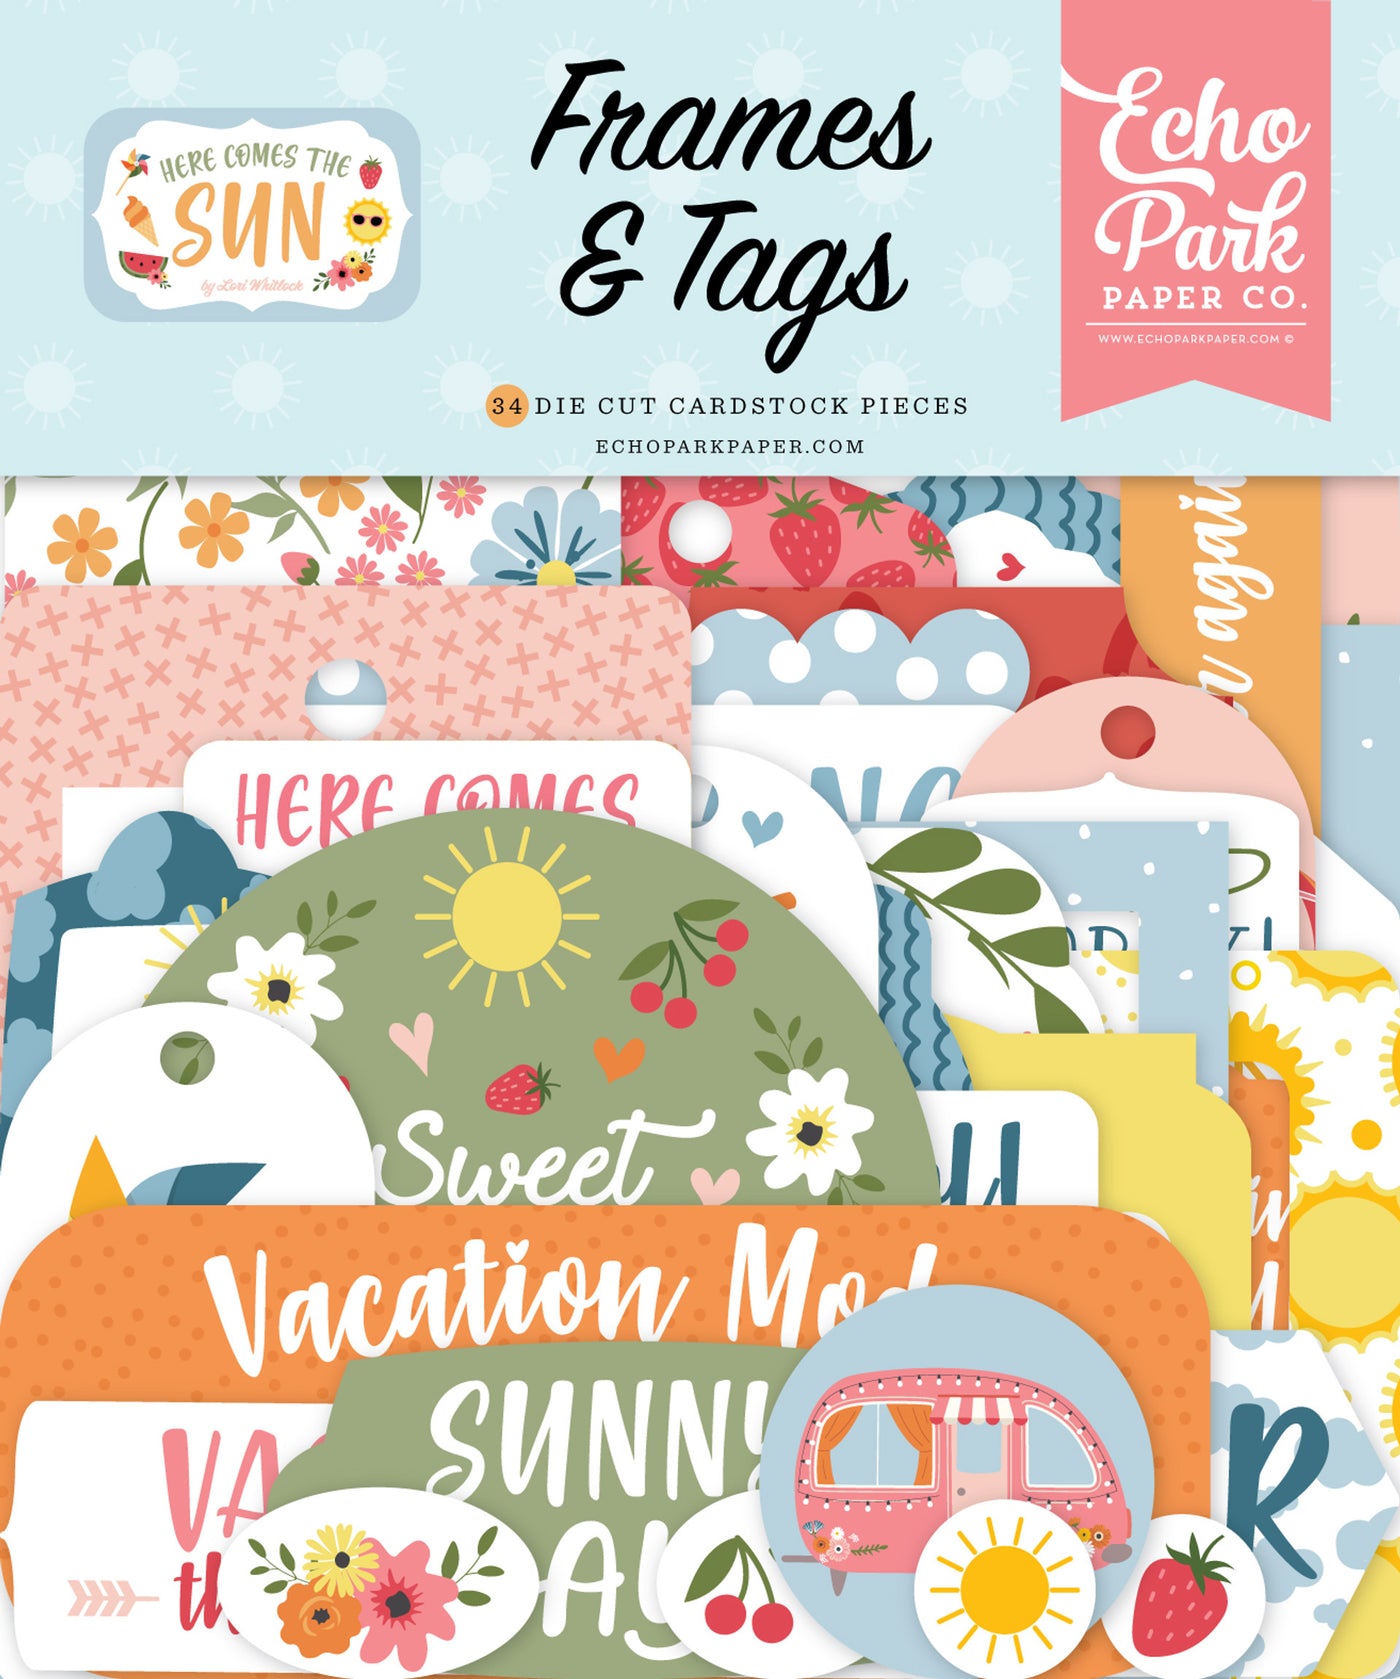 Here Comes The Sun Frames & Tags Die Cut Cardstock Pack. The pack includes 34 die-cut shapes that are ready to embellish any project. 